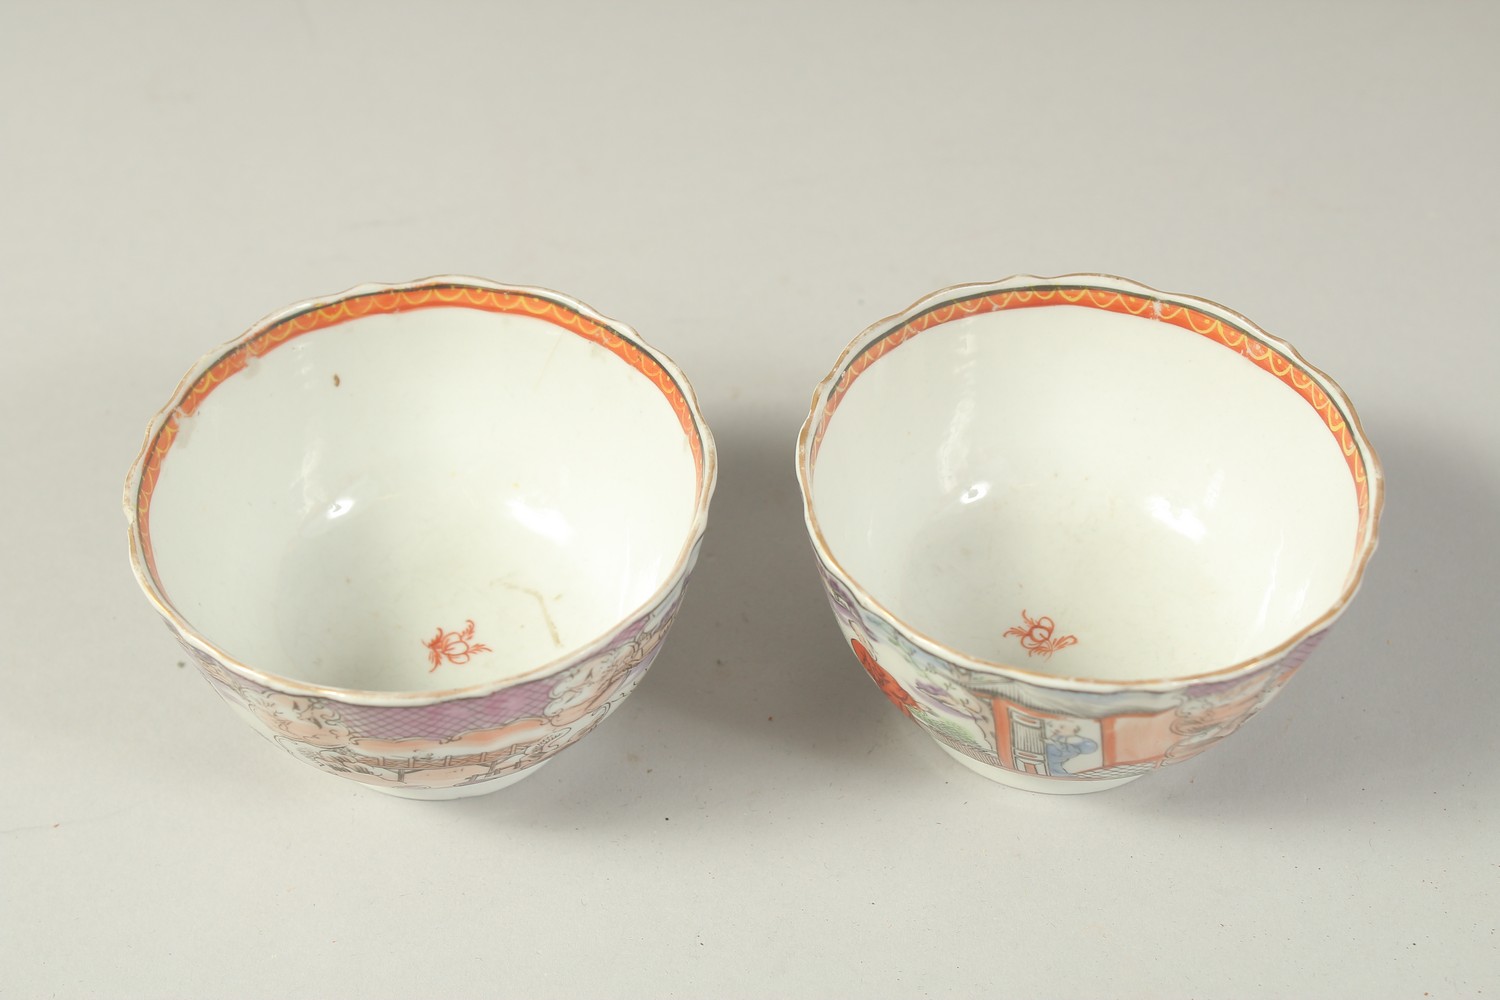 A PAIR OF CHINESE EXPORT PORCELAIN CUPS, each painted with scenes of figures, 8.5cm diameter. - Image 3 of 4